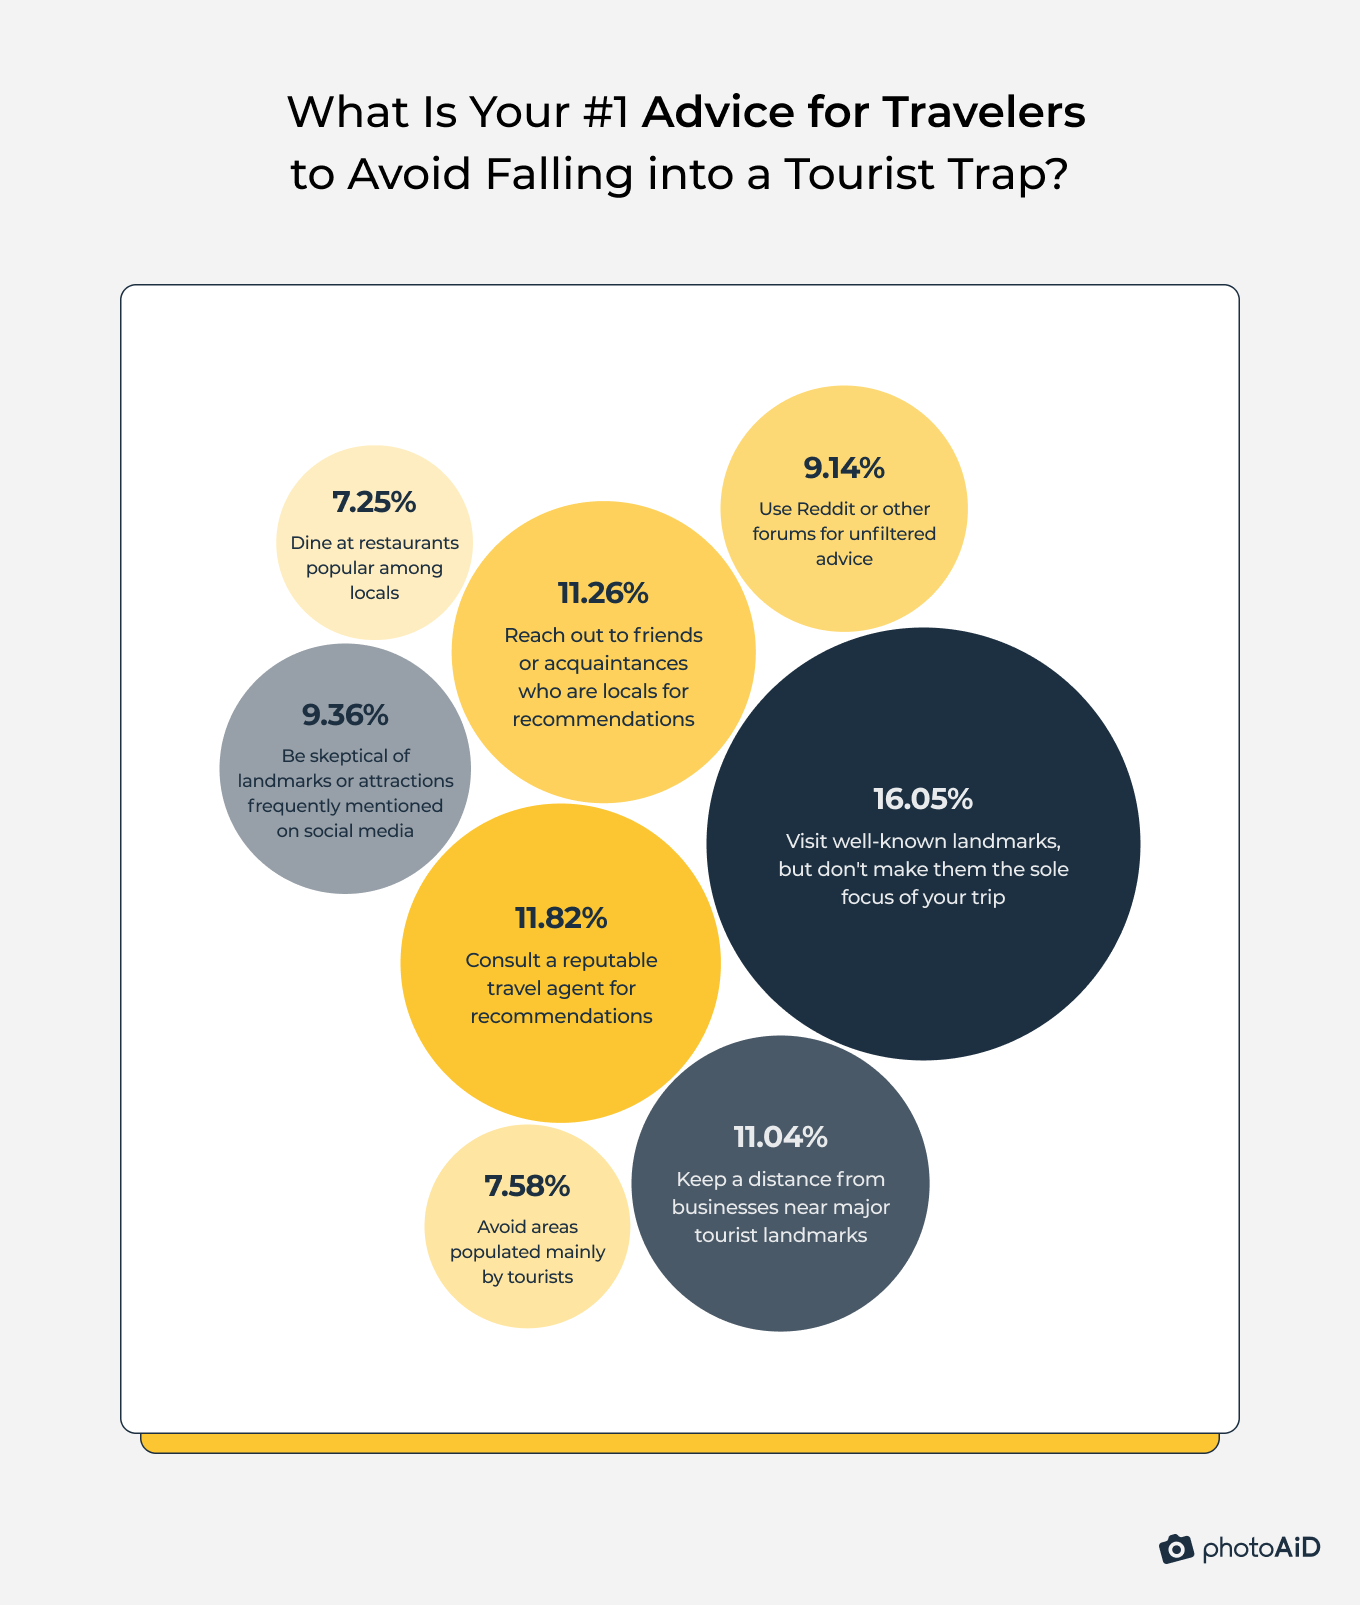 Top tips for avoiding tourist traps: focus beyond well-known landmarks, consult travel agents, and seek local recommendations